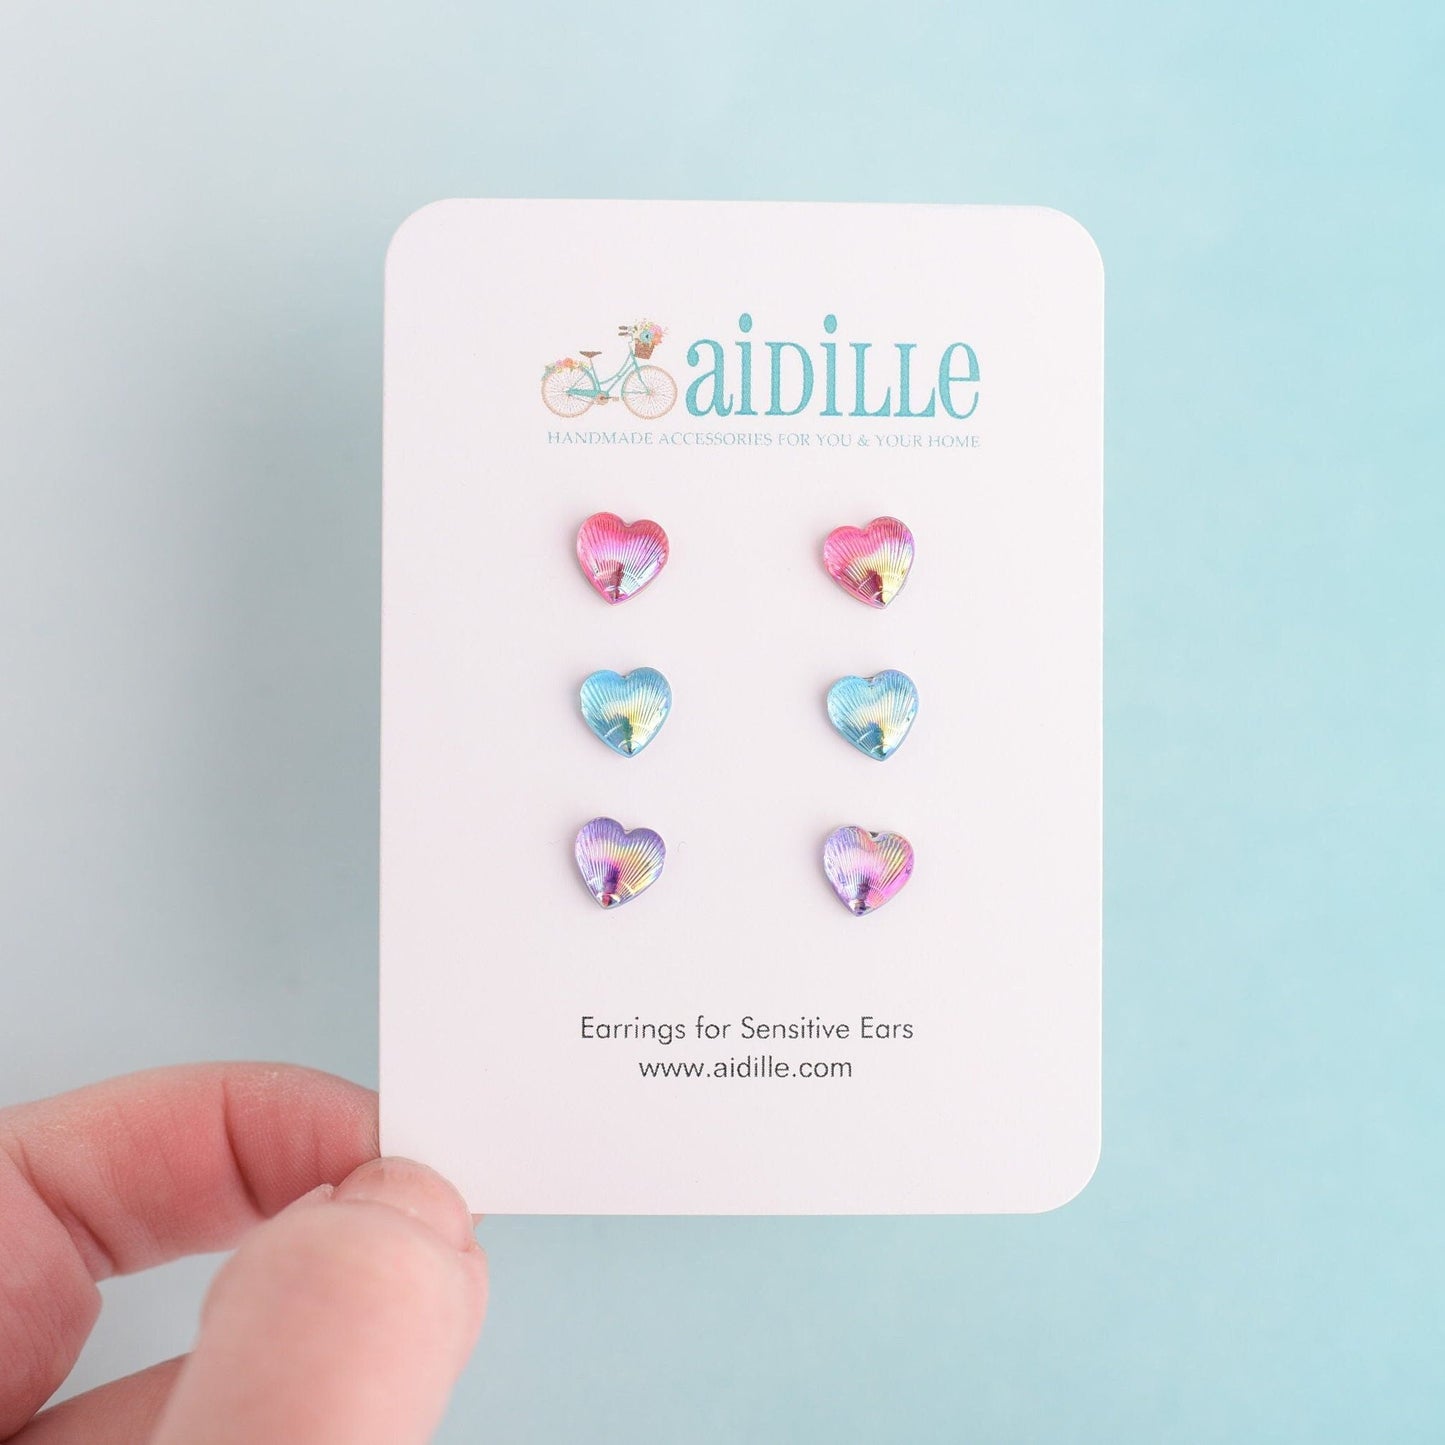 Shimmer Mini Heart Earring Trio with Titanium Posts